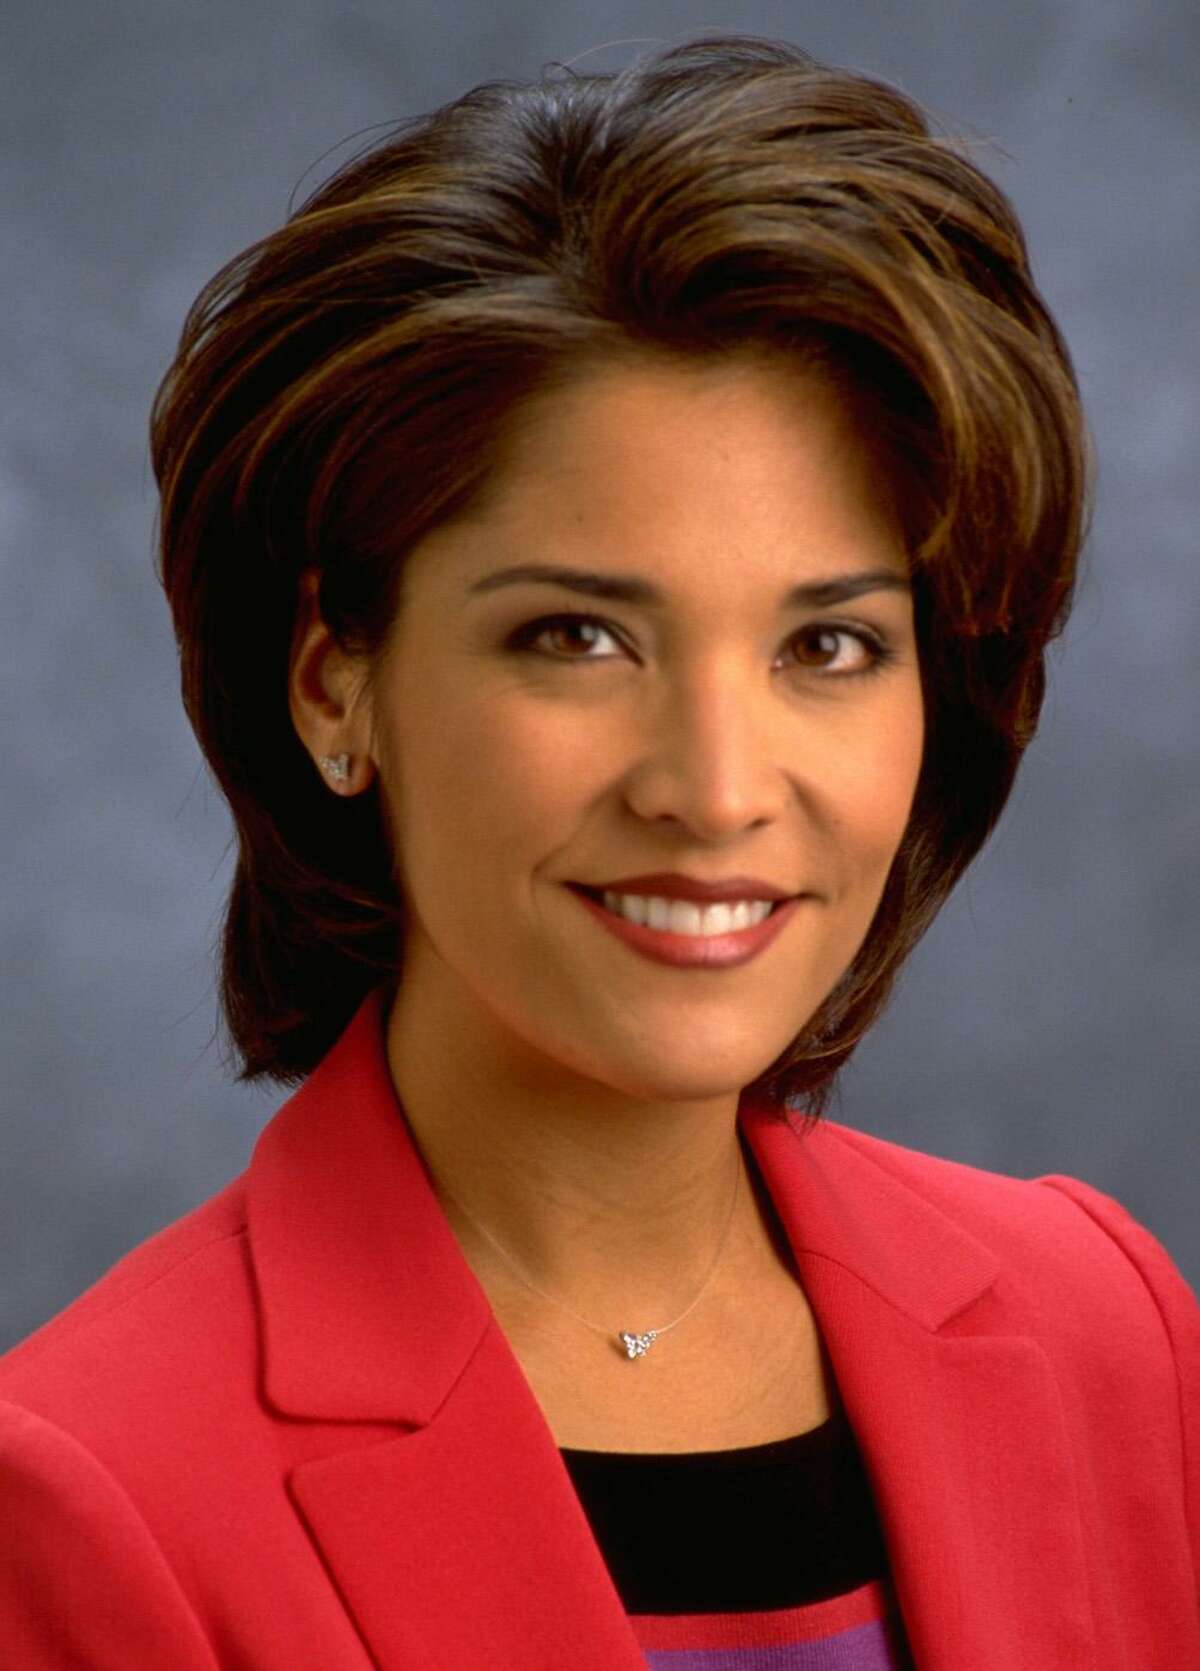 Lisa Foronda as she appeared as a KHOU Channel 11 television news anchor.